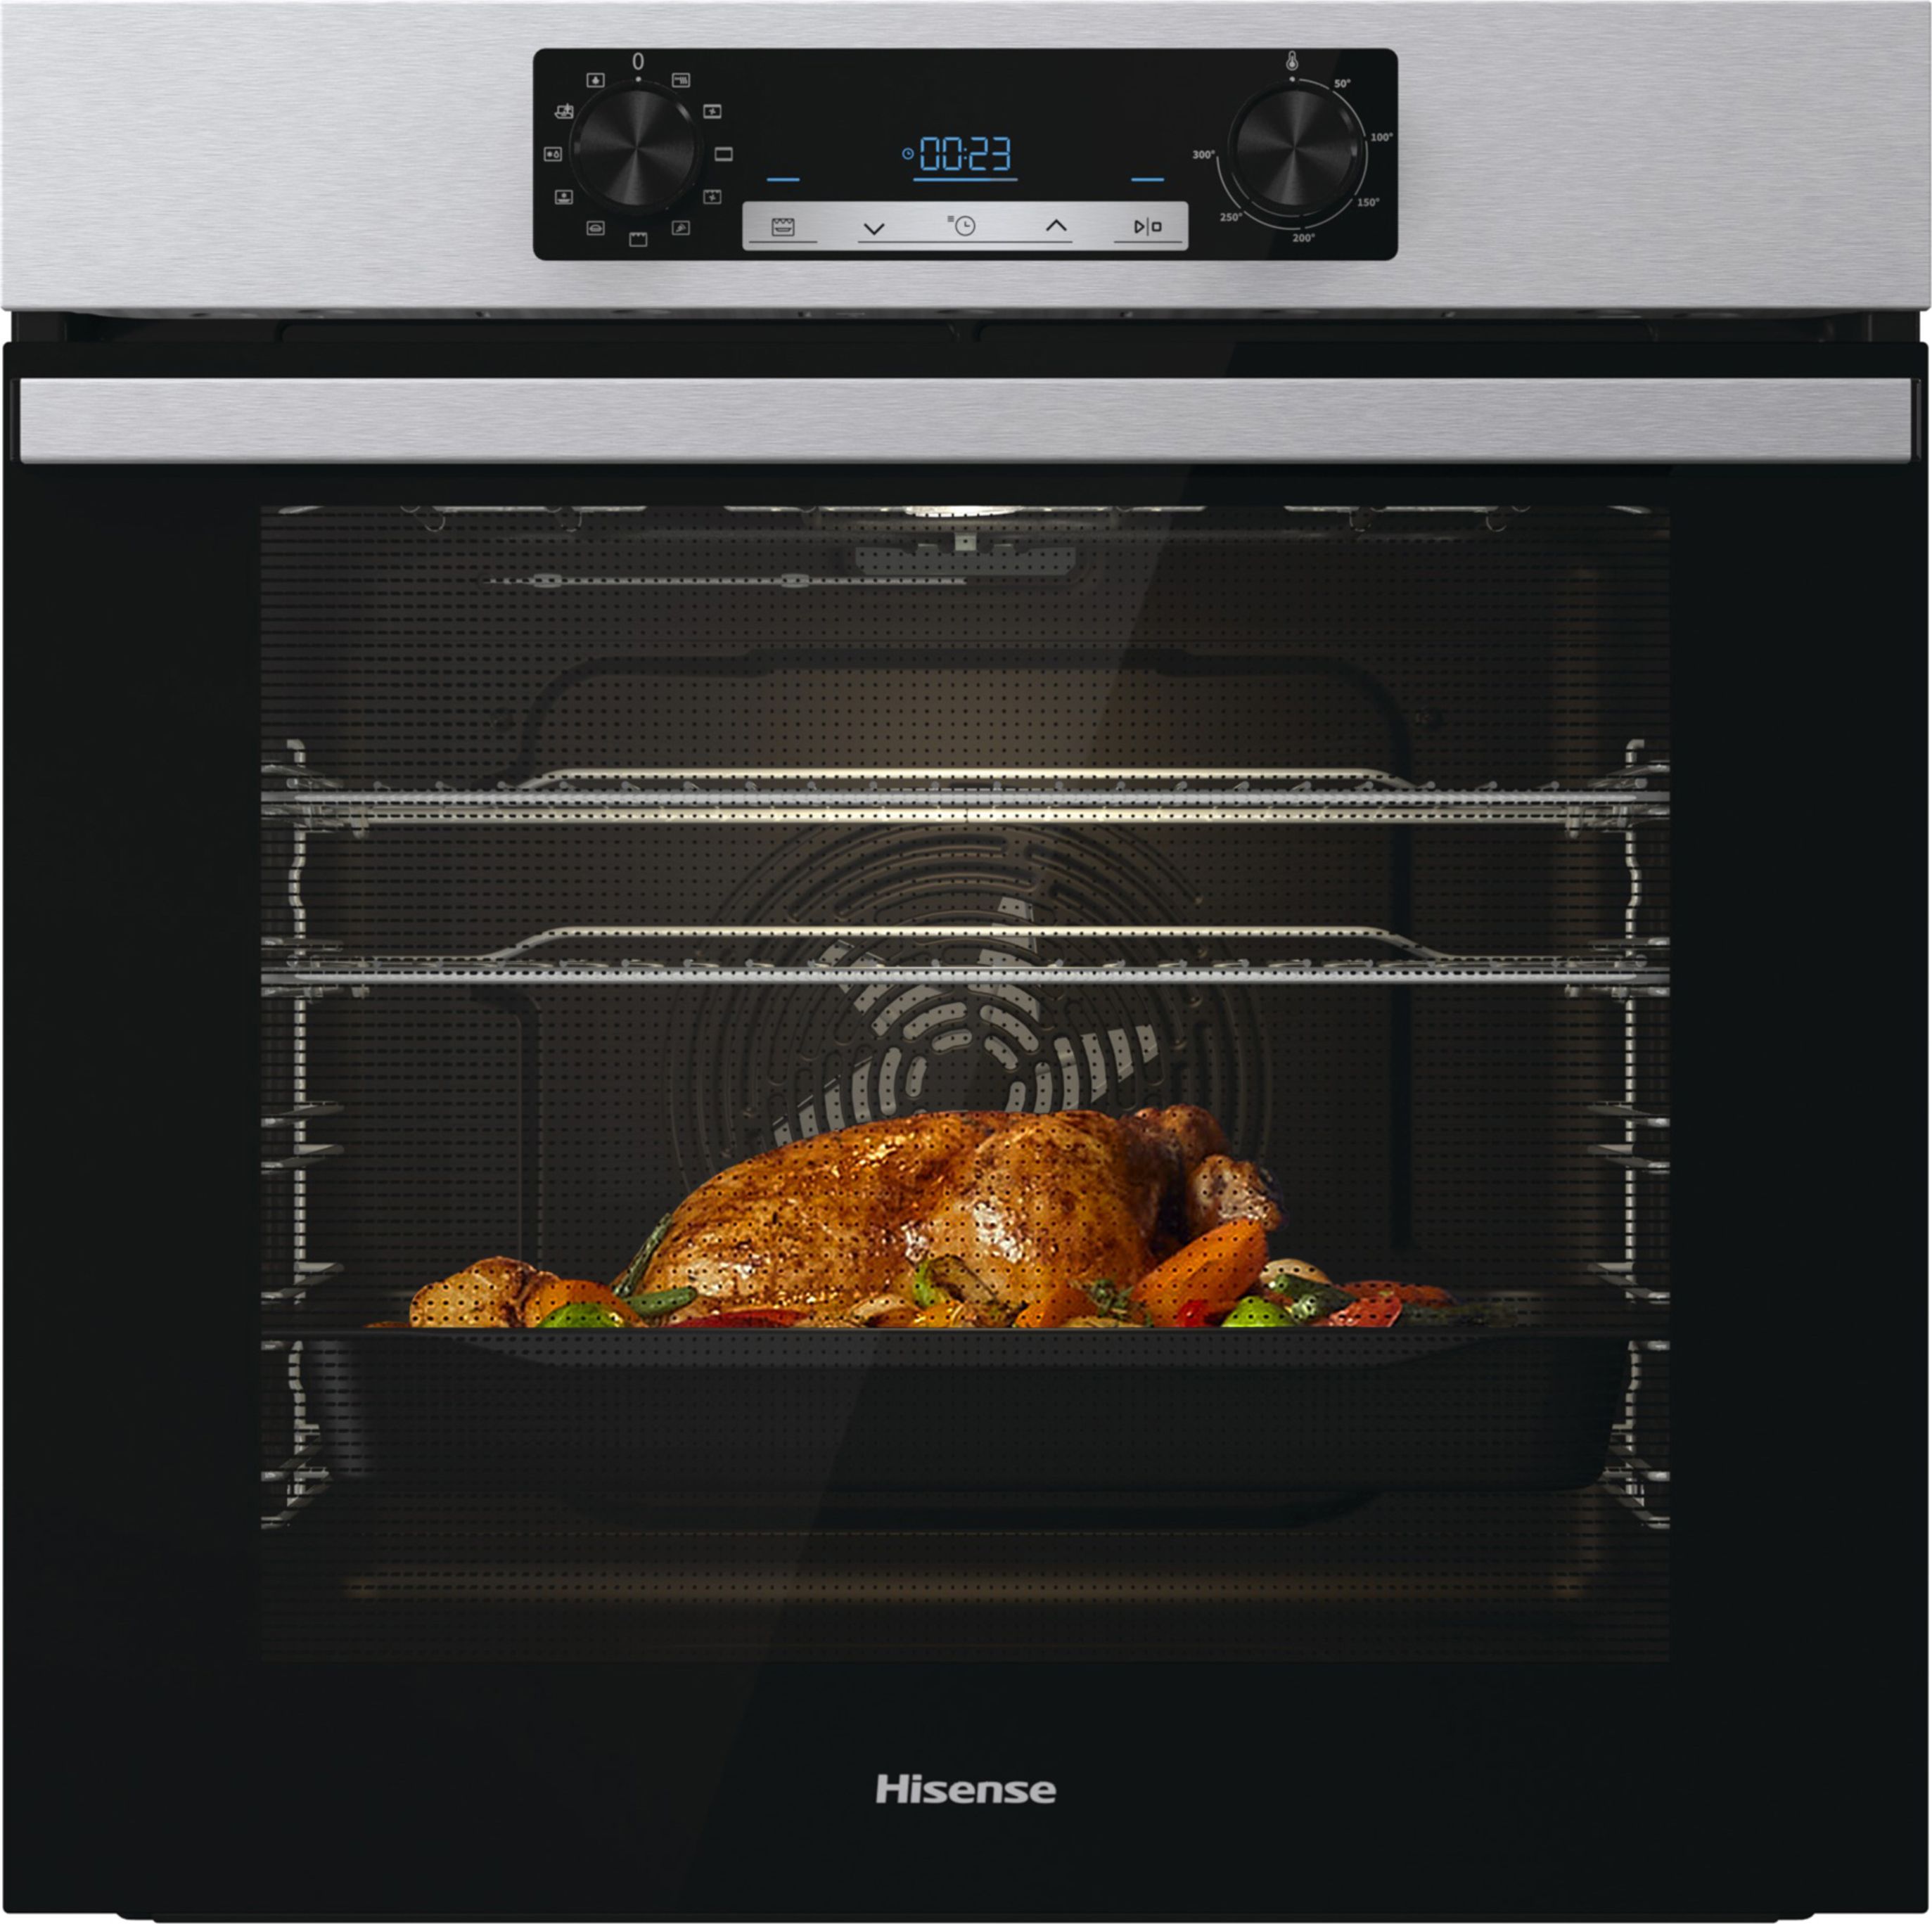 Hisense BI62212AXUK Built In Electric Single Oven - Stainless Steel - A Rated, Stainless Steel